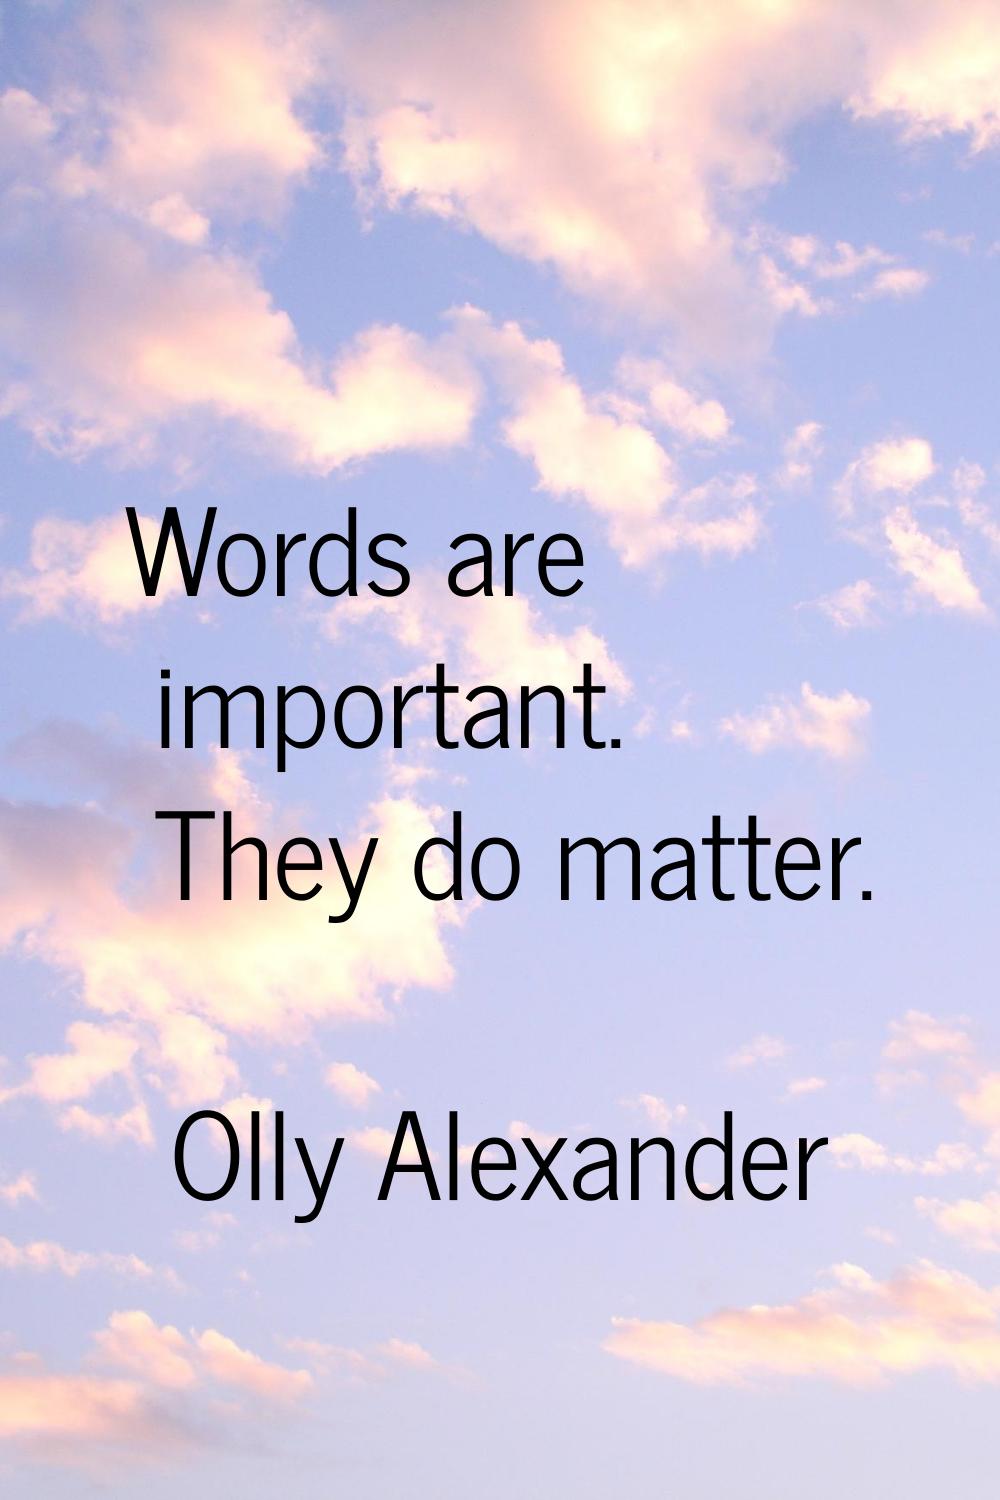 Words are important. They do matter.